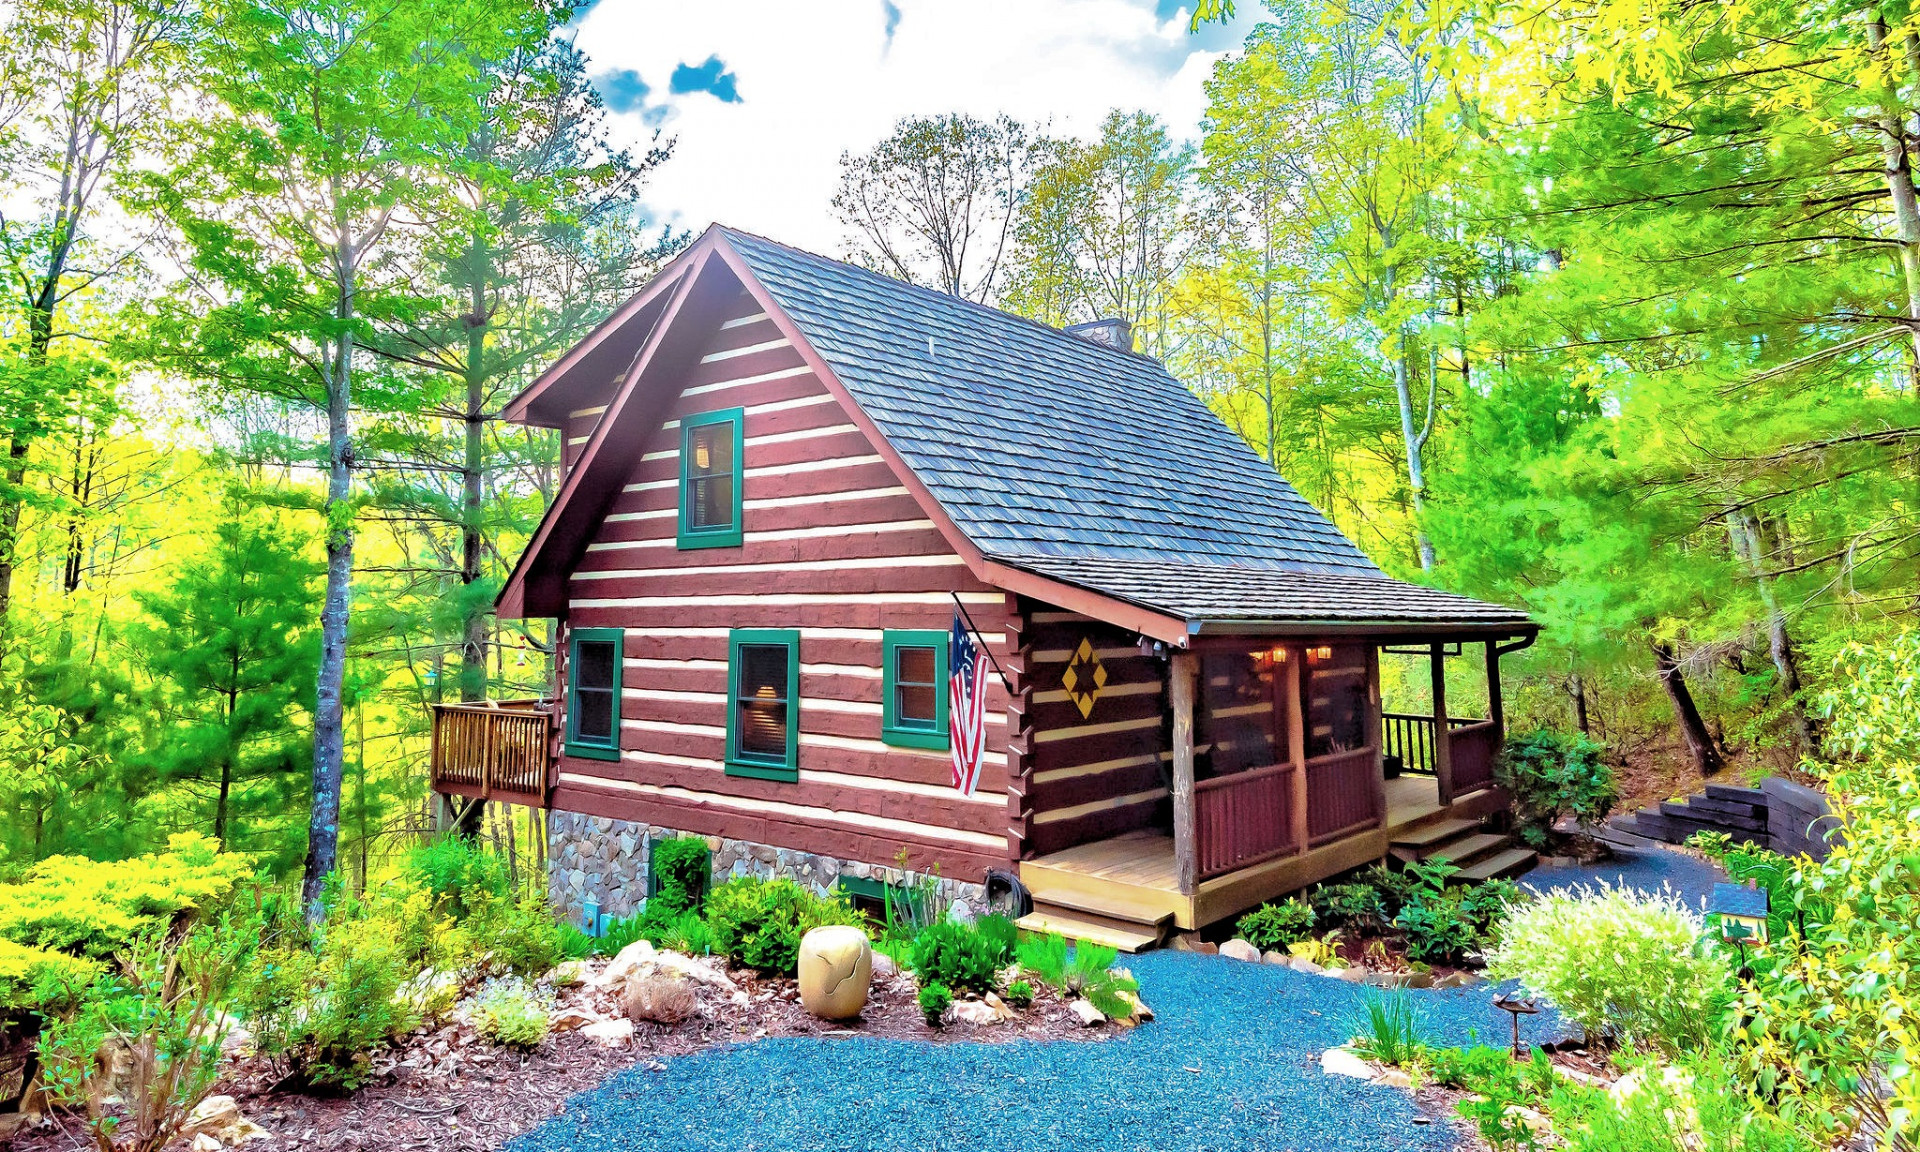 CABIN IN THE WOODS IN THE NORTH CAROLINA MOUNTAINS!  Step back into time with this 3-bedroom, 3-bath hand hewn log cabin nestled in a forest setting in the Christmas Mountain community located in the Fleetwood area of Southern Ashe County.